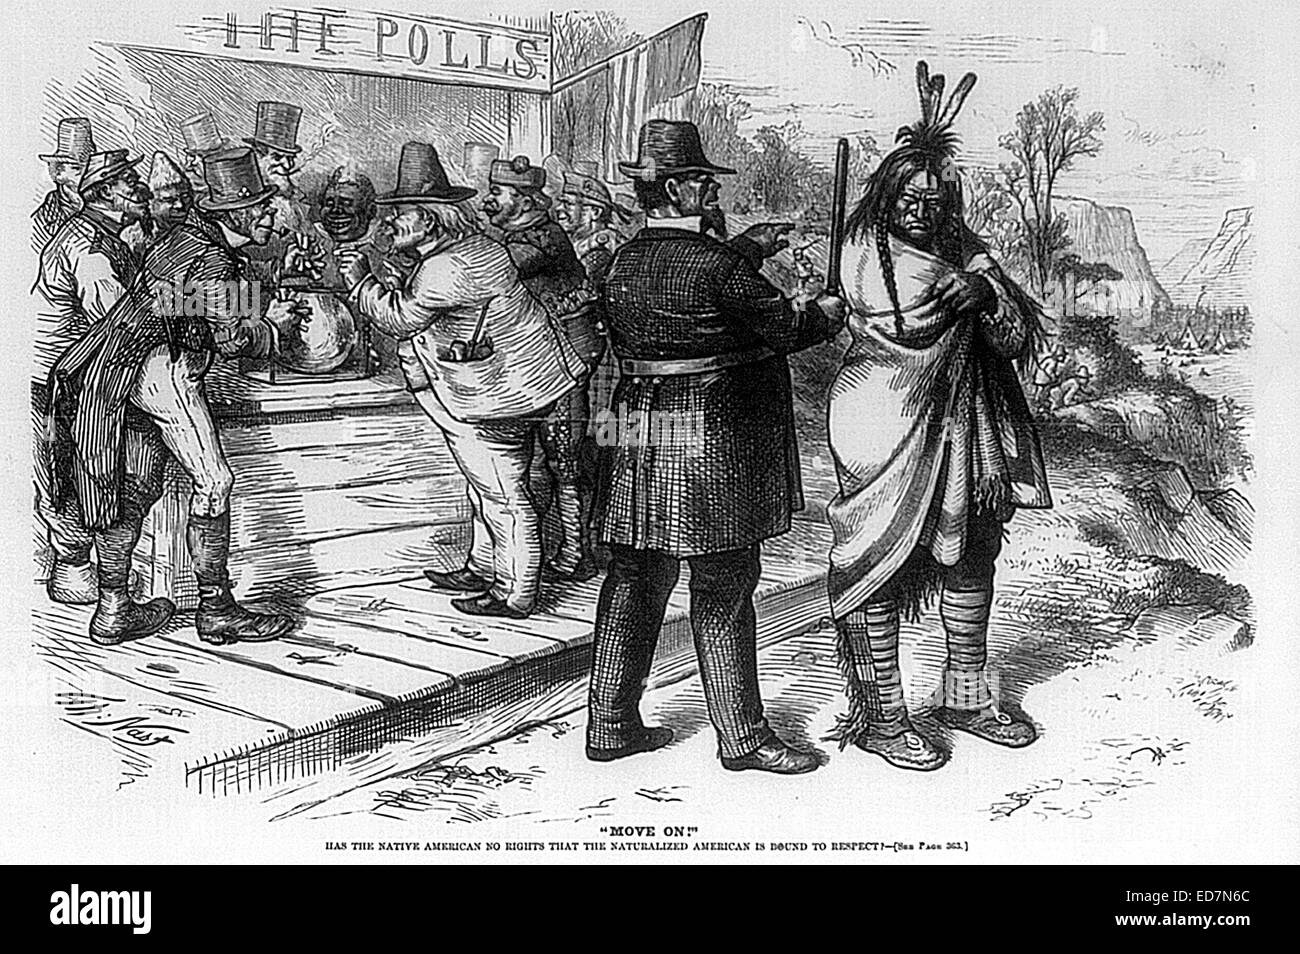 'Move on! Has the Native American no rights that the naturalized American is bound to respect?' Thomas Nast Cartoon. April 22, 1871 Stock Photo